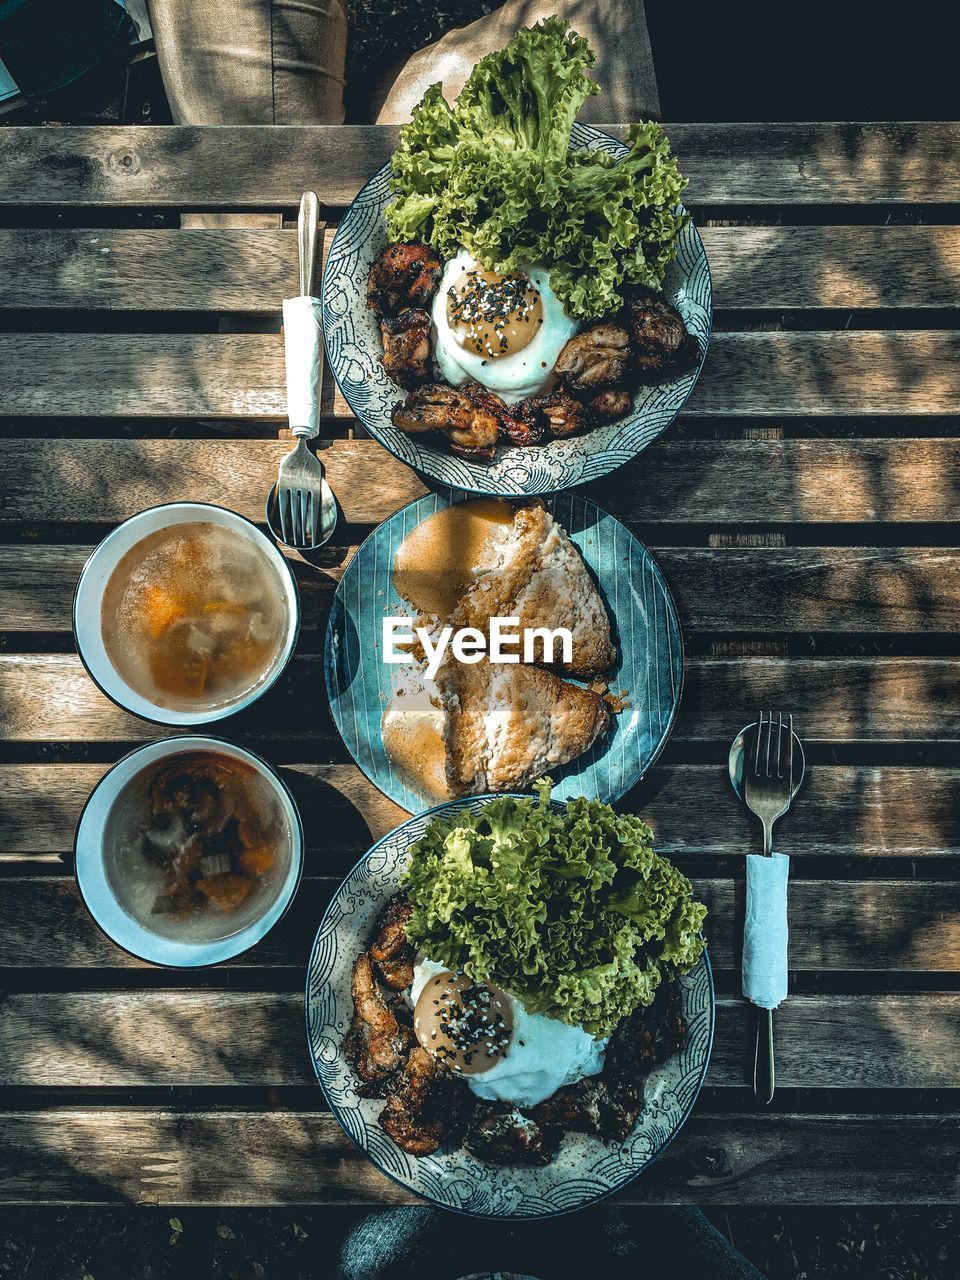 Foods on wooden table.